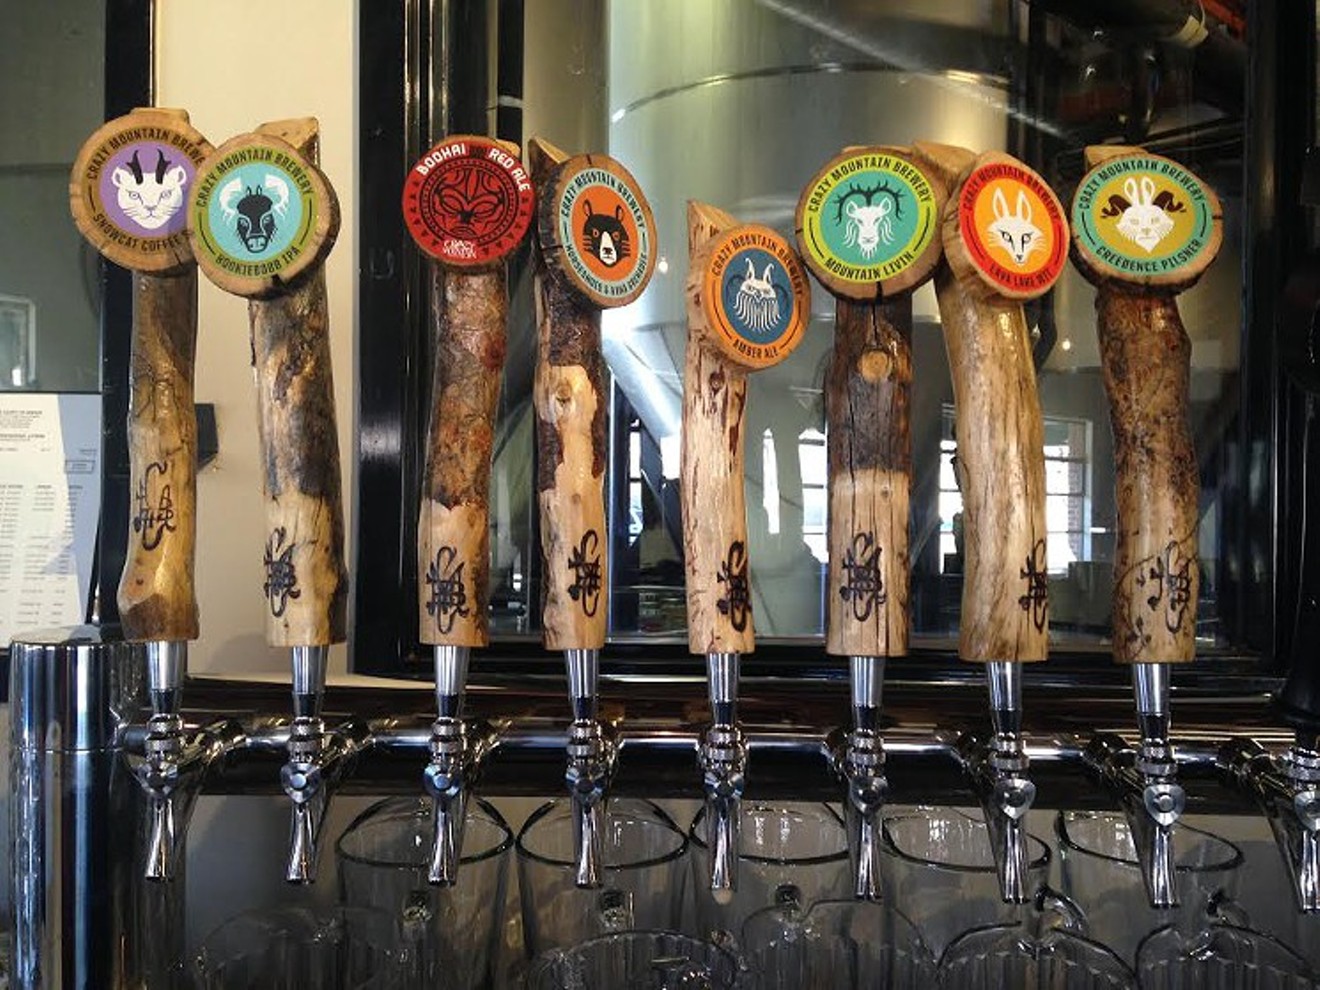 Crazy Mountain's tap handles are ready to pour beer at the Denver location.